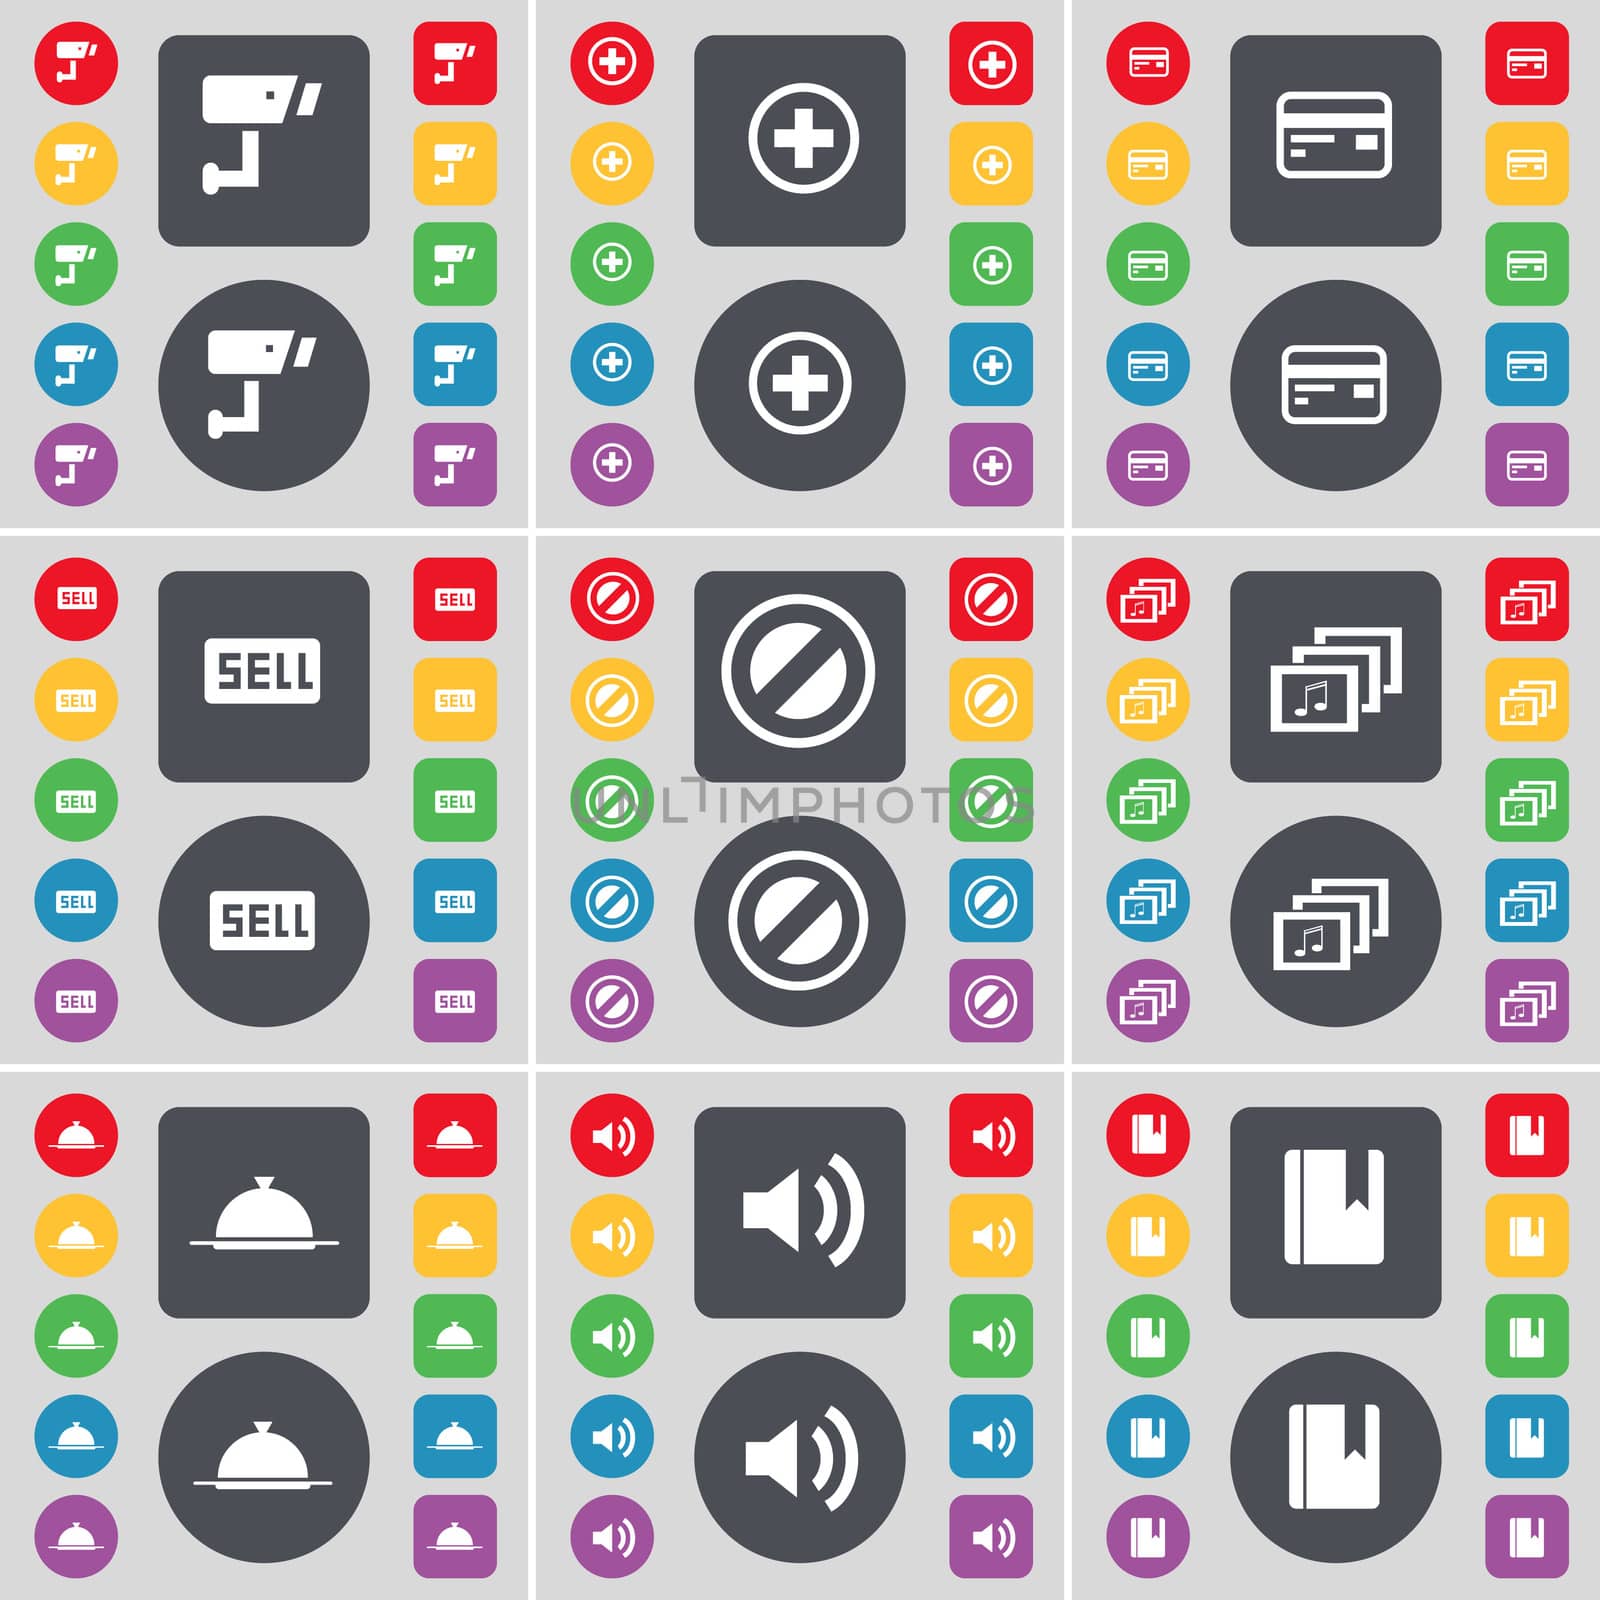 CCTV, Plus, Credit card, Sell, Stop, Gallery, Tray, Sound, Dictionary icon symbol. A large set of flat, colored buttons for your design. illustration